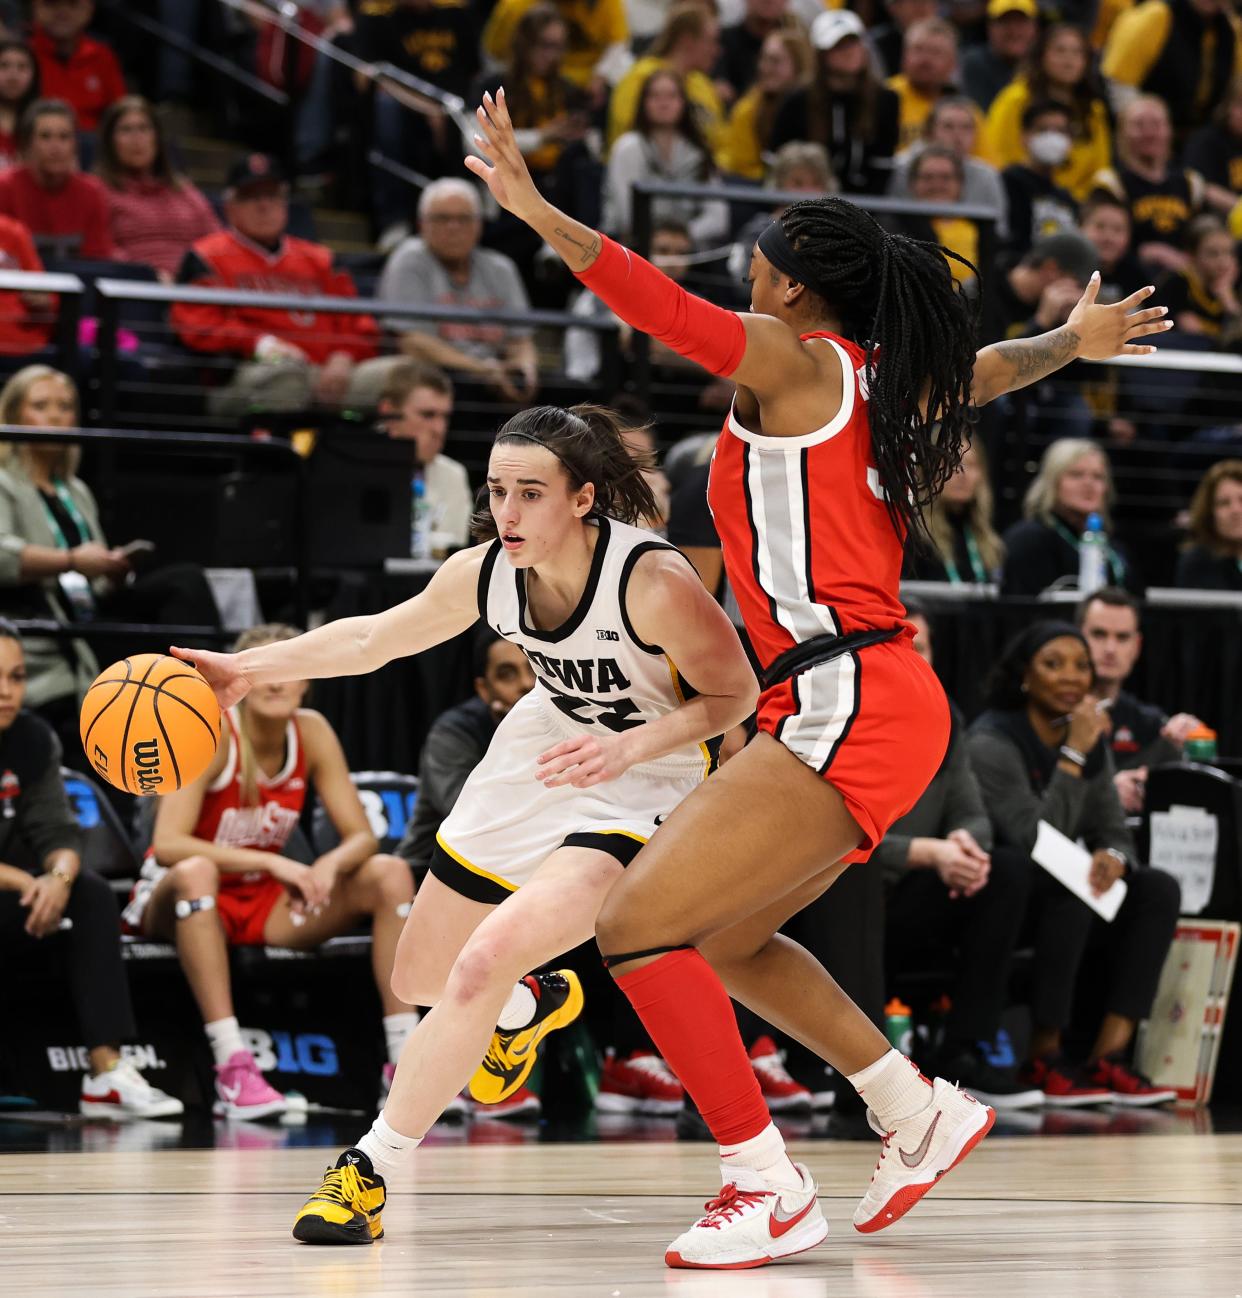 Mar 5, 2023; Minneapolis, MINN, USA; Iowa Hawkeyes guard Caitlin Clark (22) dribbles while Ohio State Buckeyes forward Cotie McMahon (32) defends during the first half at Target Center. Mandatory Credit: Matt Krohn-USA TODAY Sports